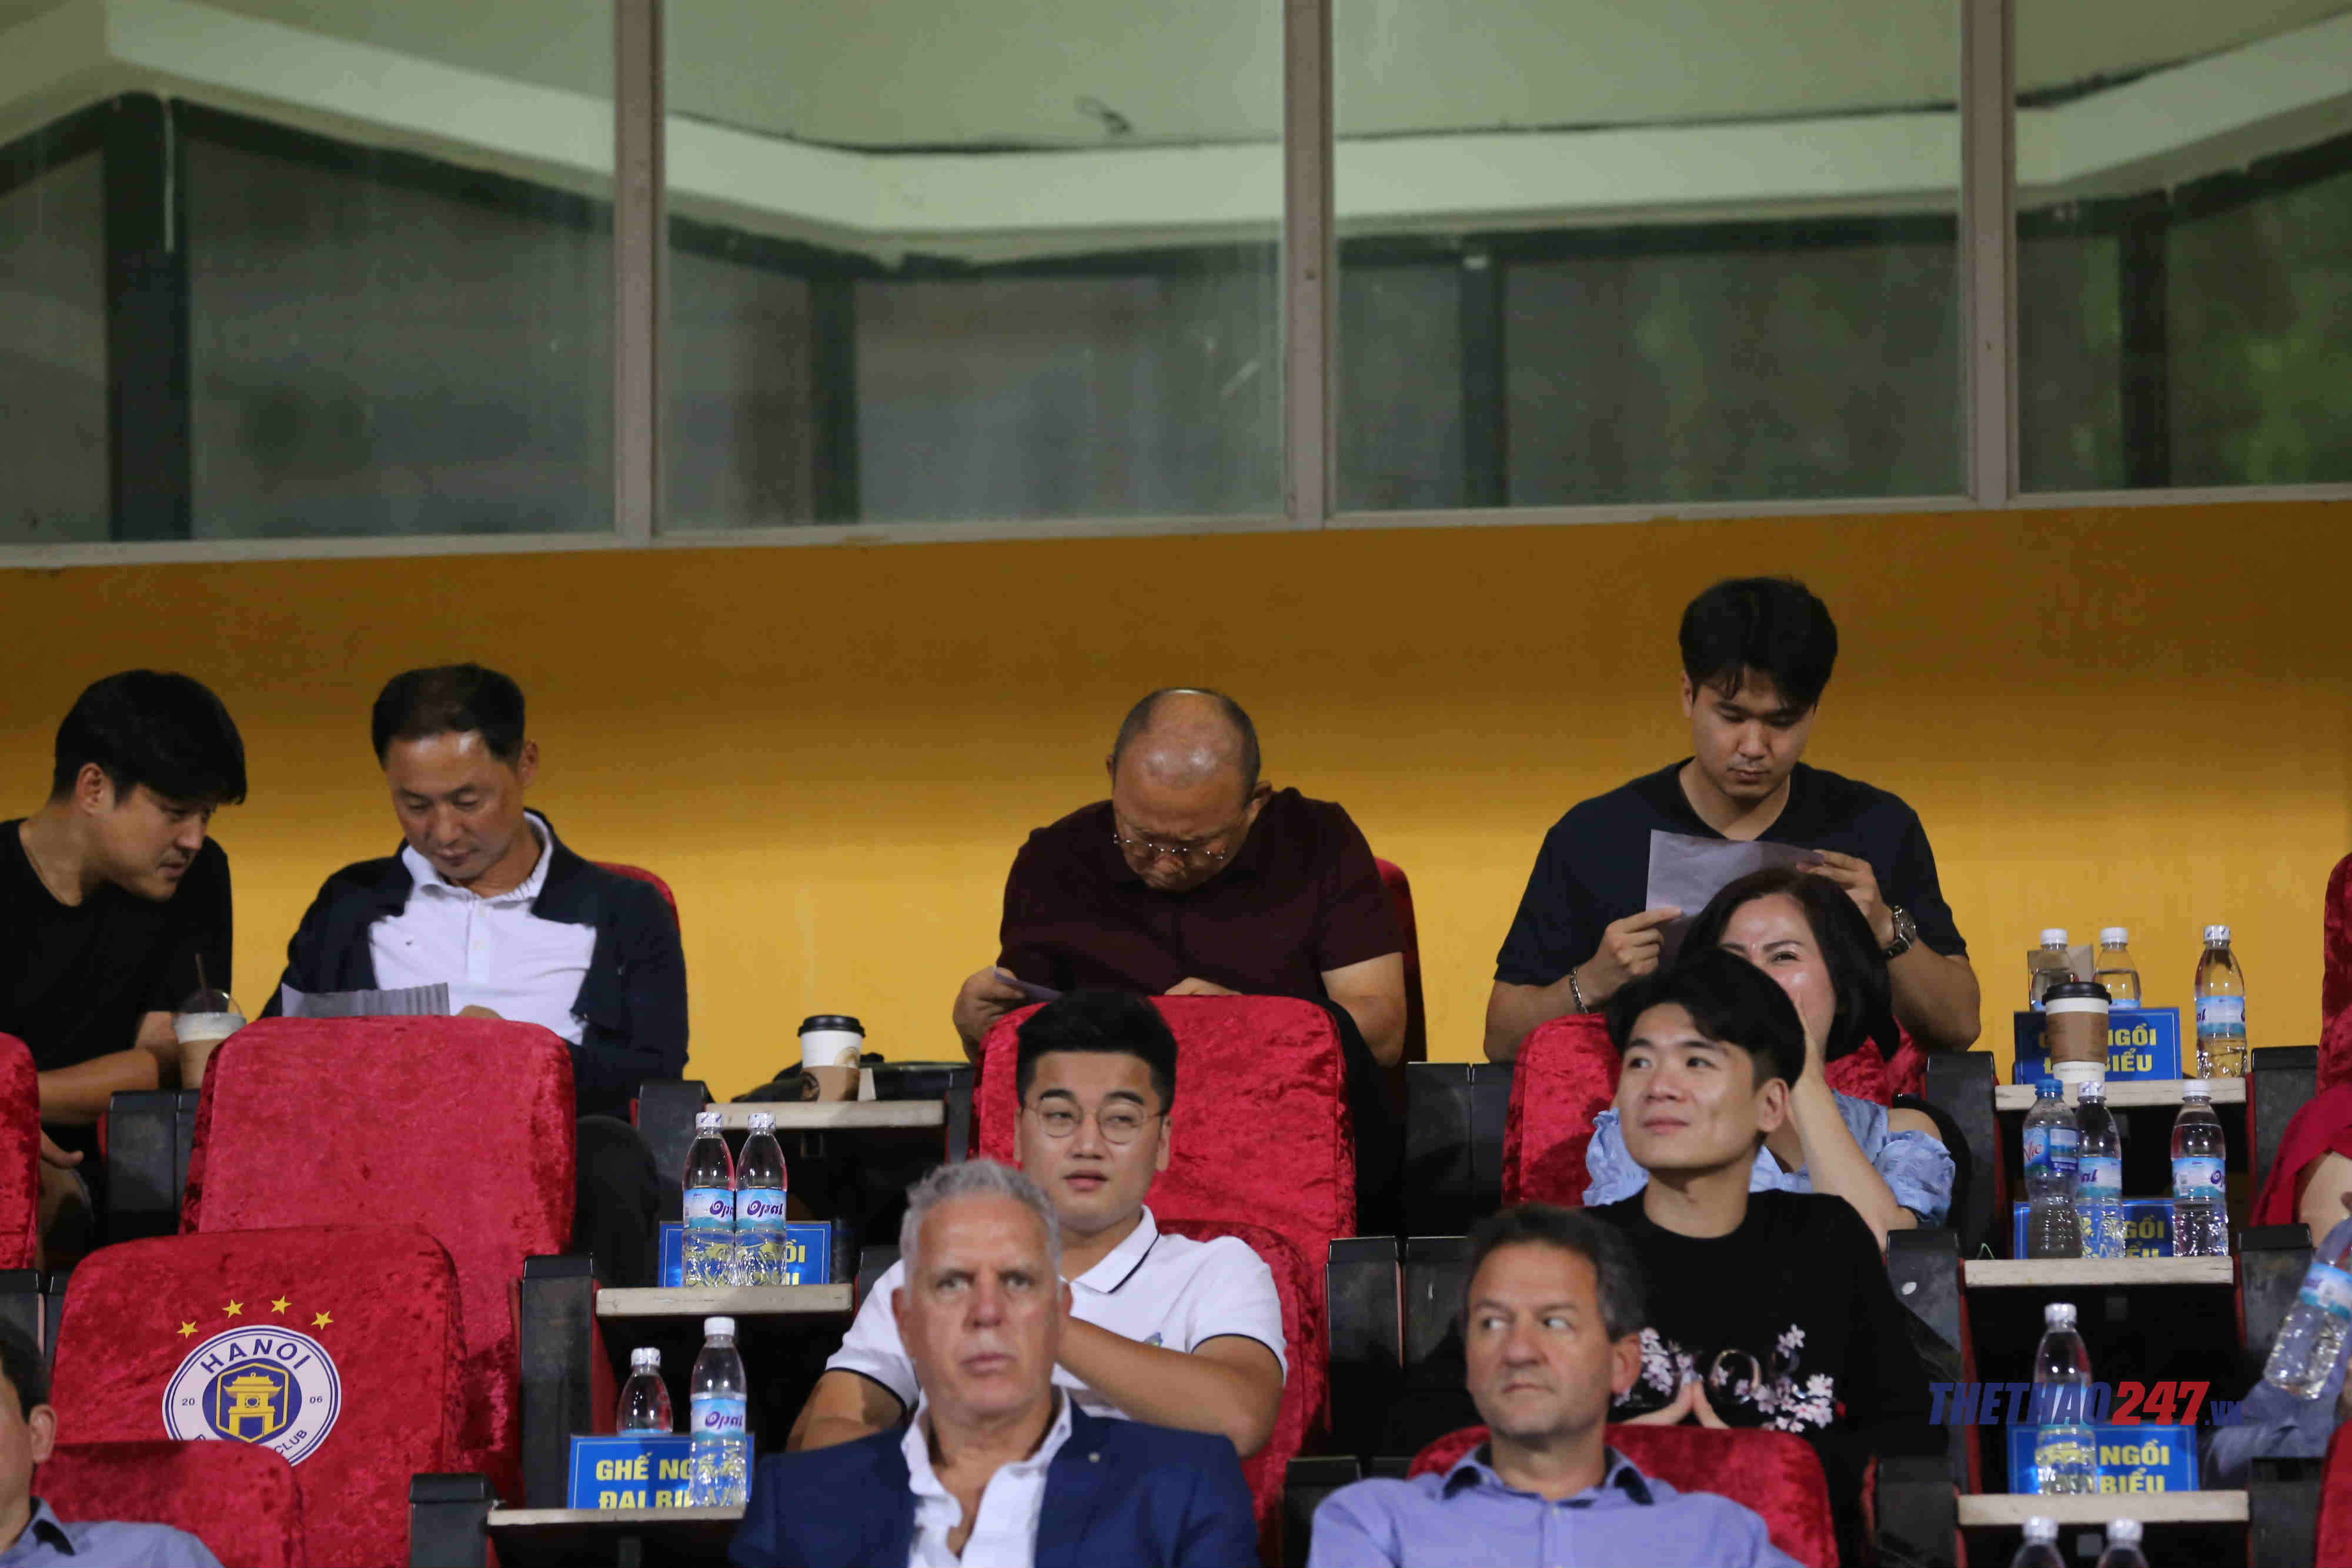 Park Hang-seo scouts national players in Hanoi vs Ho Chi Minh match